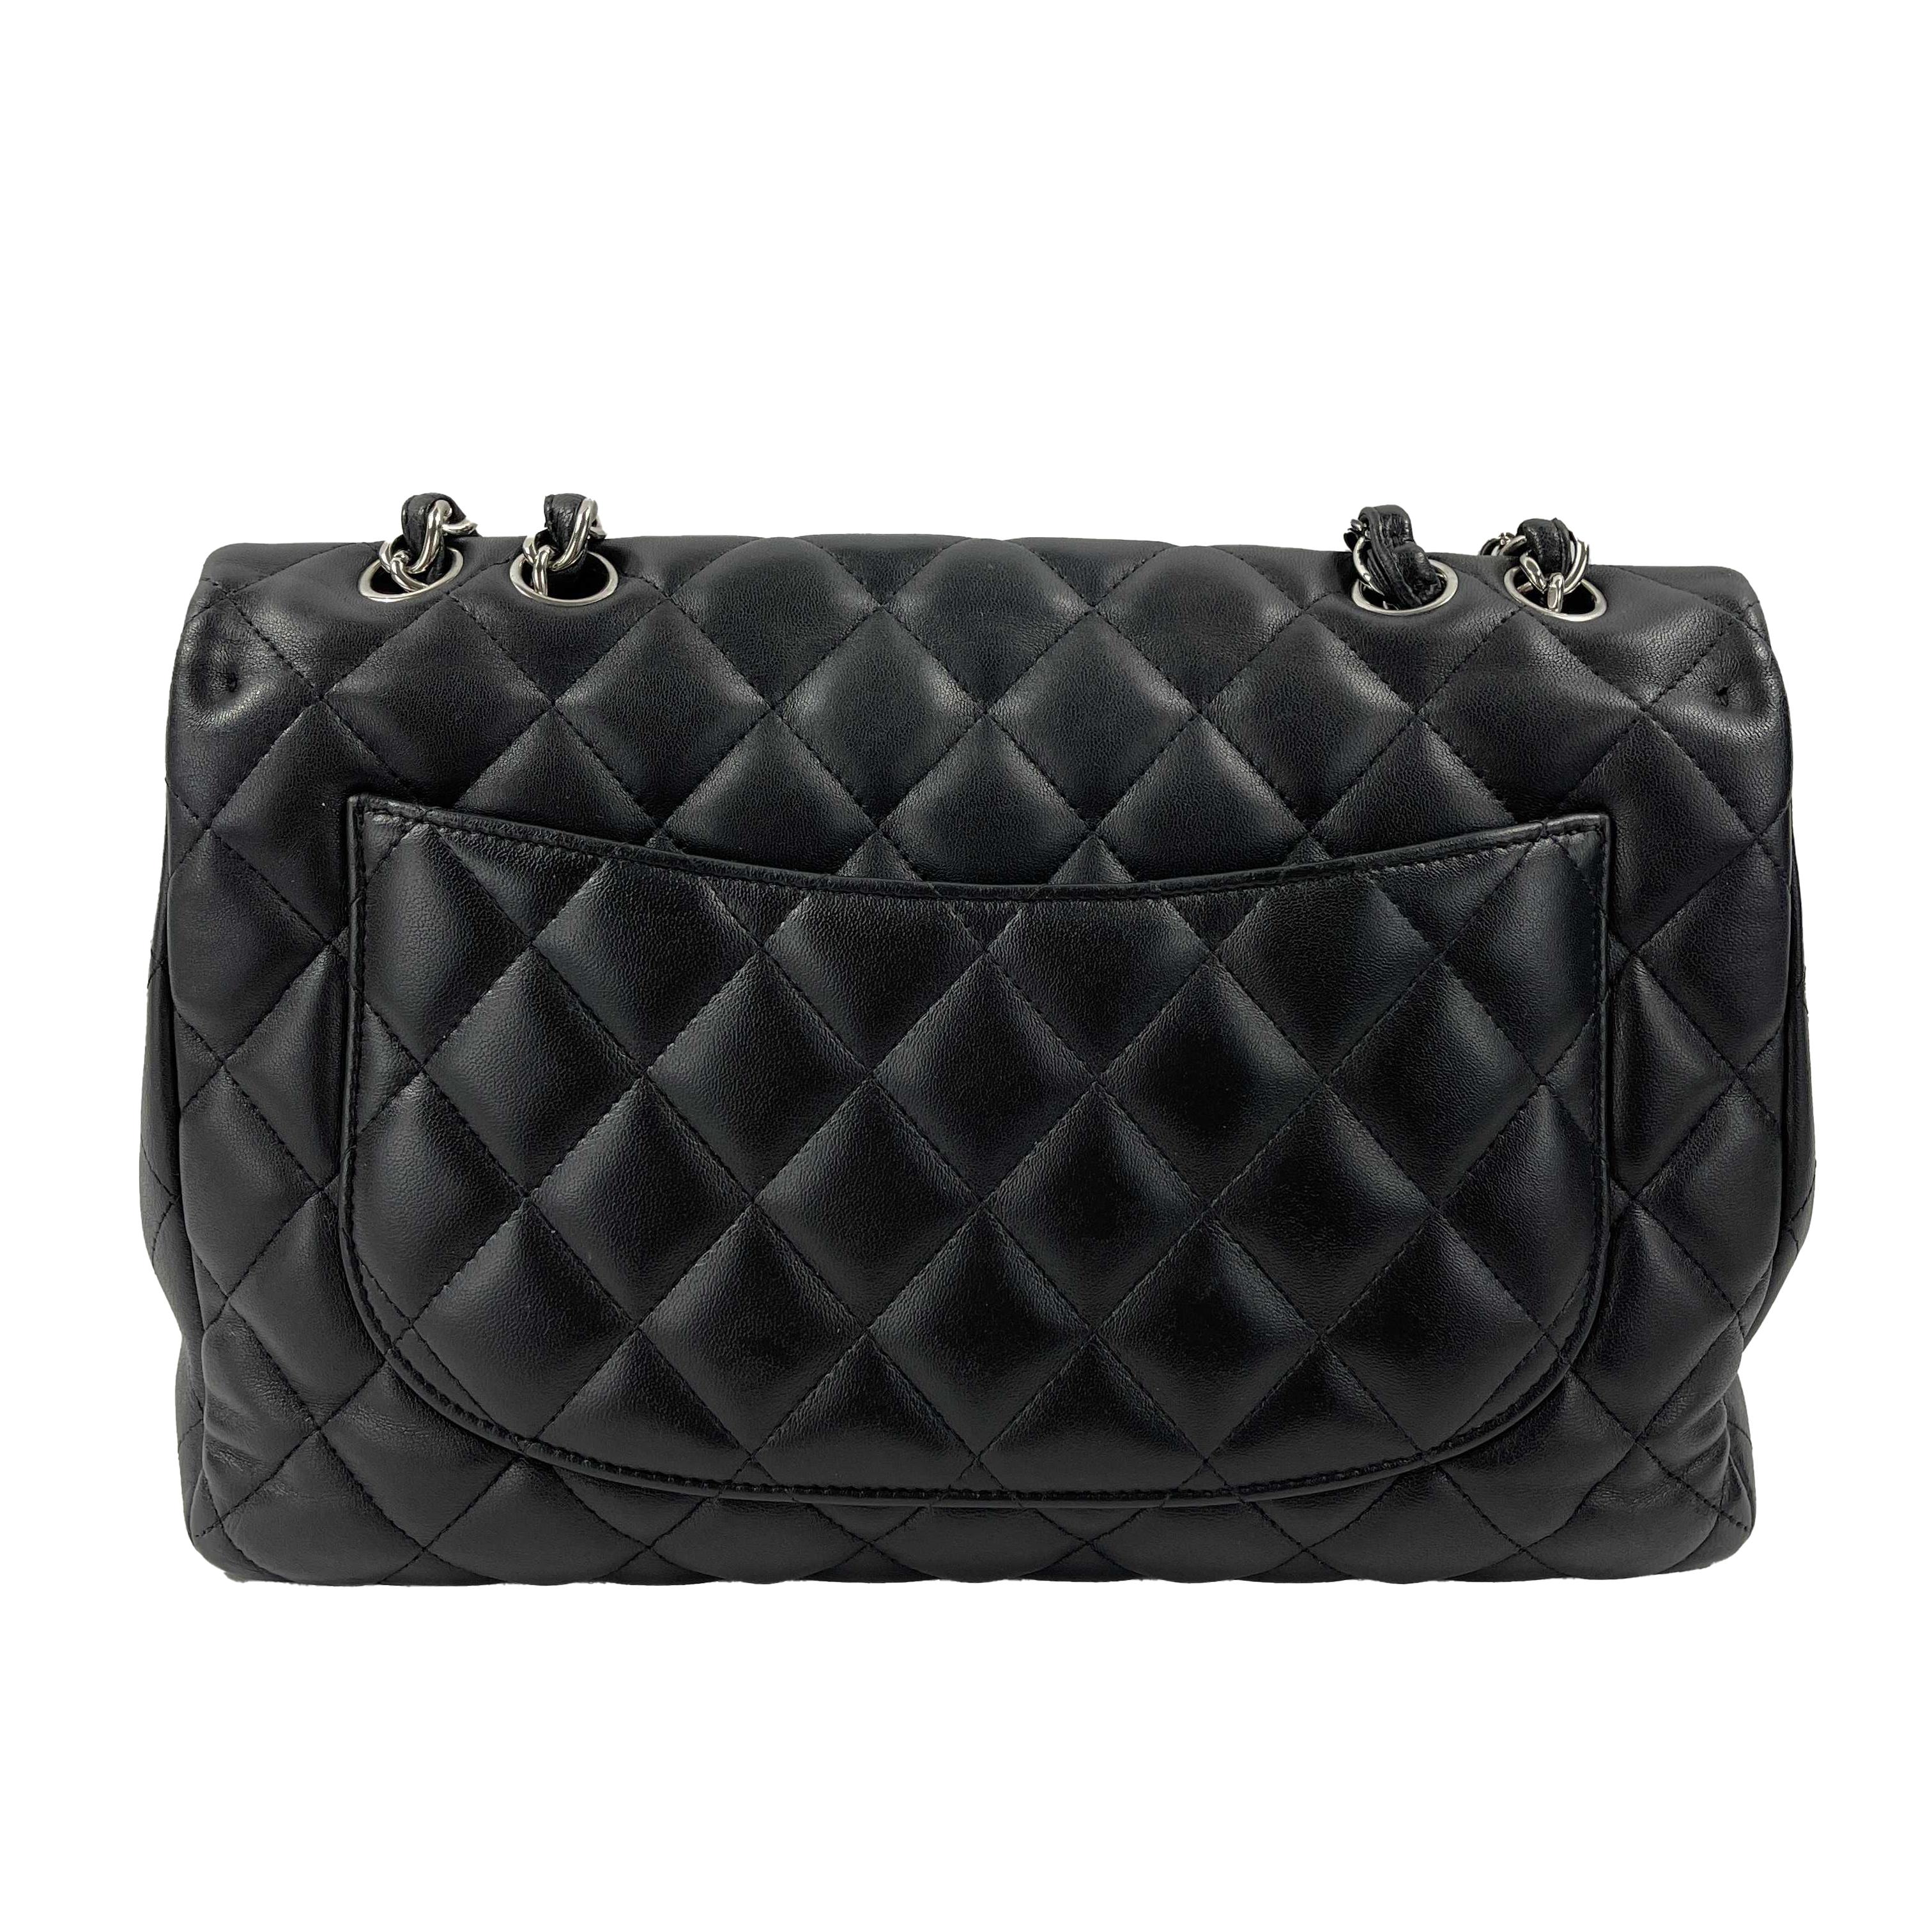 CHANEL - Jumbo Classic Flap CC Quilted Black Lambskin Shoulder Bag / Crossbody

Description

2008-2009 Collection era.
This classic flap bag features soft lambskin leather in black with the classic Chanel diamond quilt pattern.
One main interior